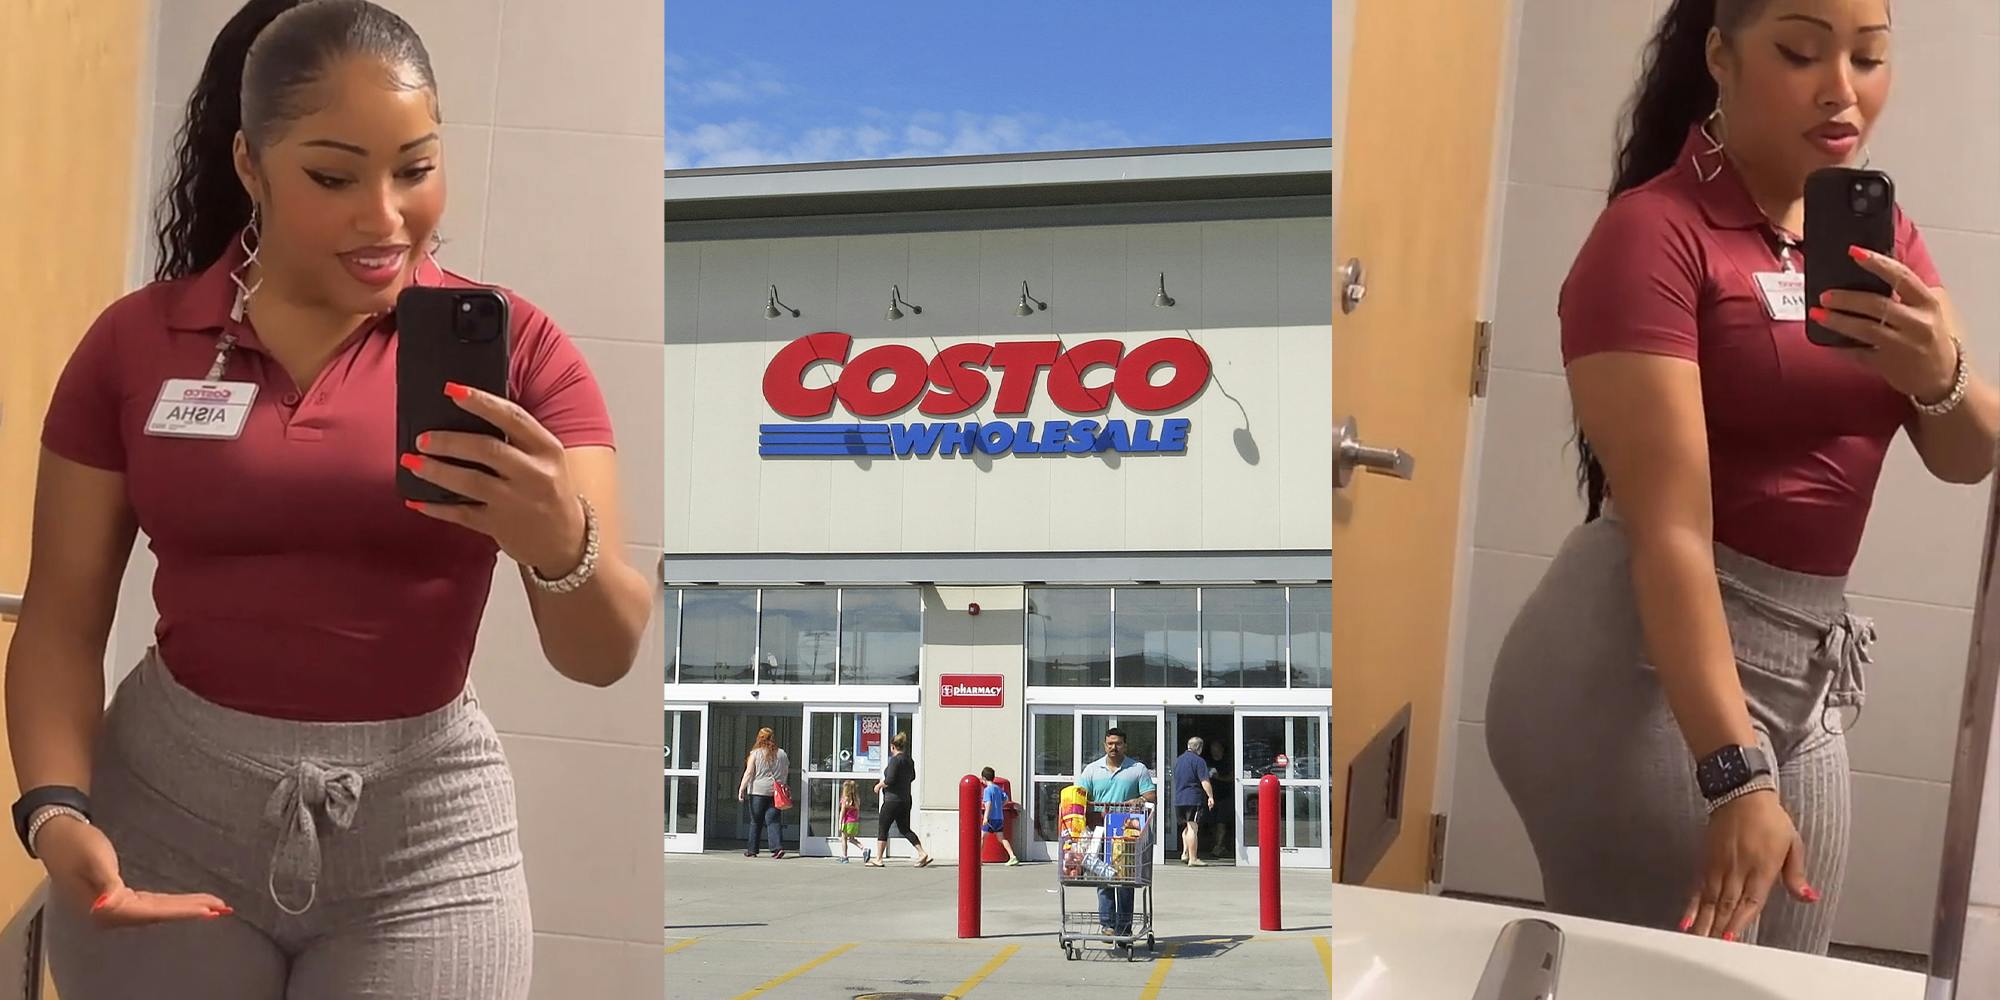 Y'all think her work outfit is inappropriate?🤔 Costco employee claims she  was unfairly disciplined for wearing this outfit to work.…